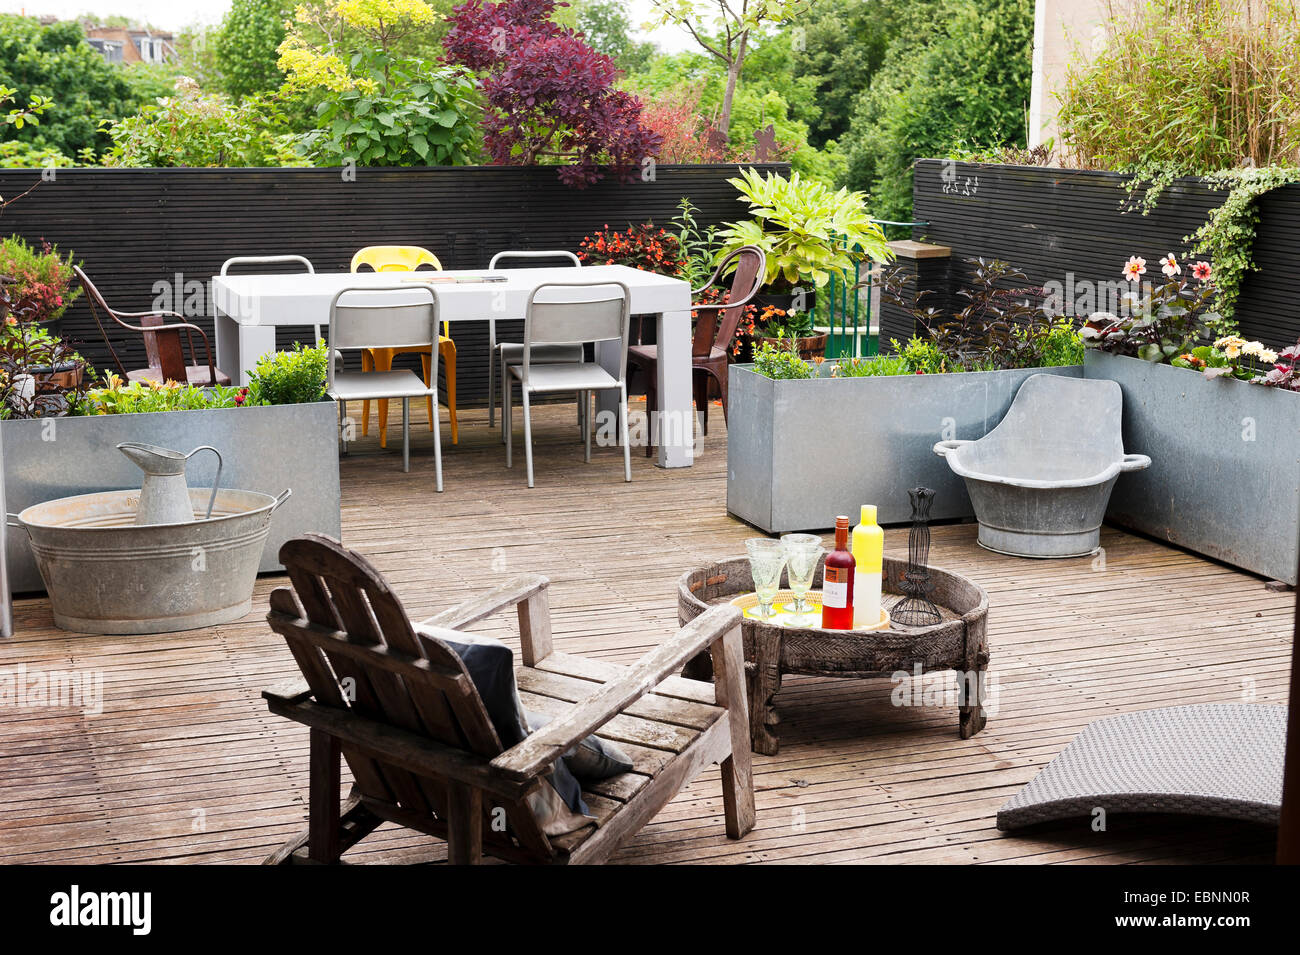 Wooden deck terrace with wooden furniture and tin baths Stock Photo